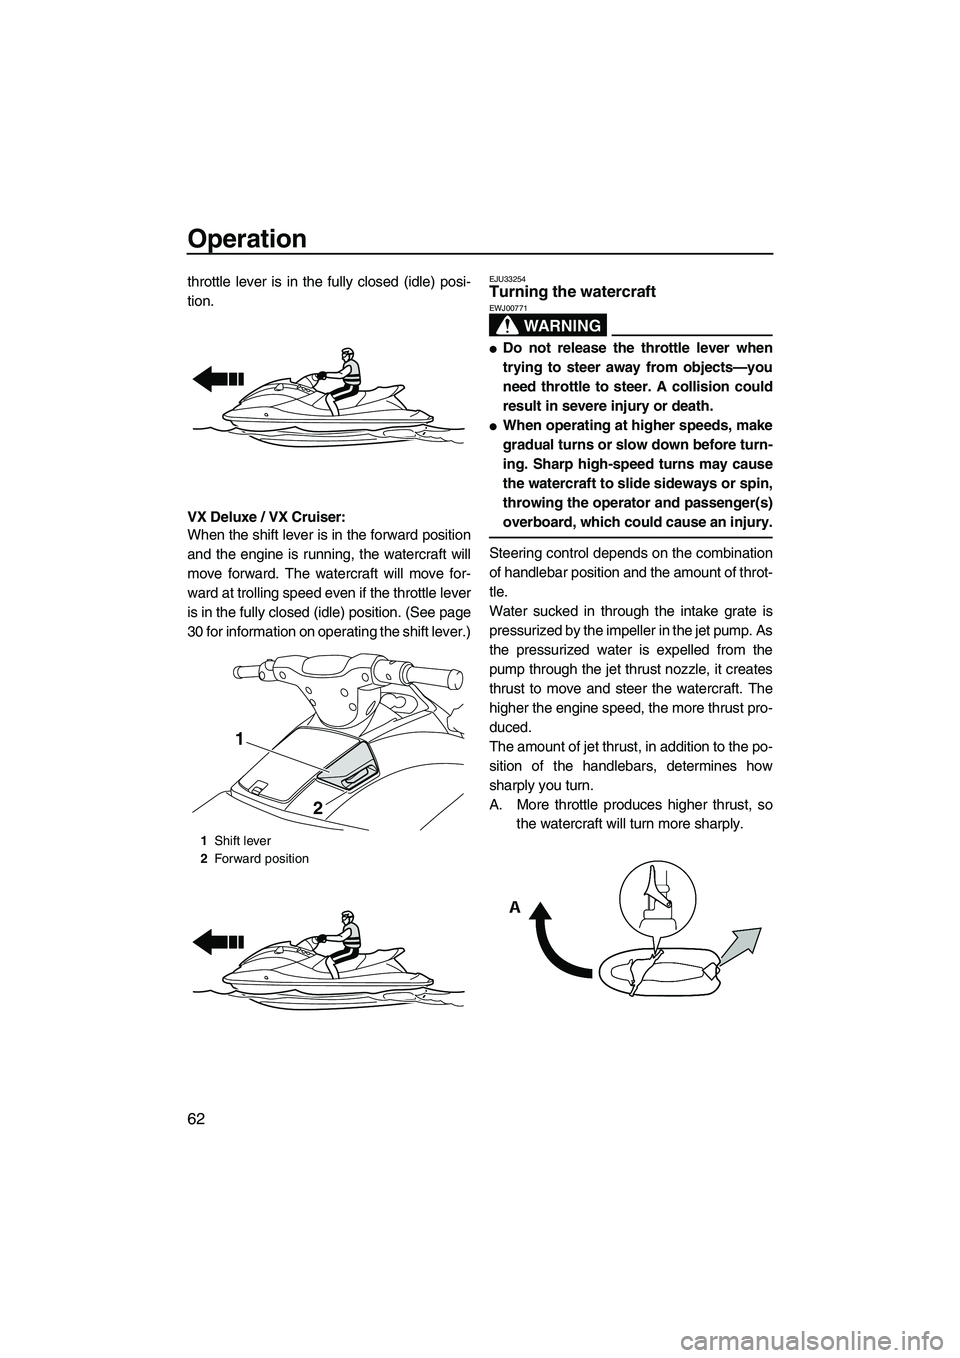 YAMAHA VX SPORT 2013  Owners Manual Operation
62
throttle lever is in the fully closed (idle) posi-
tion.
VX Deluxe / VX Cruiser: 
When the shift lever is in the forward position
and the engine is running, the watercraft will
move forwa